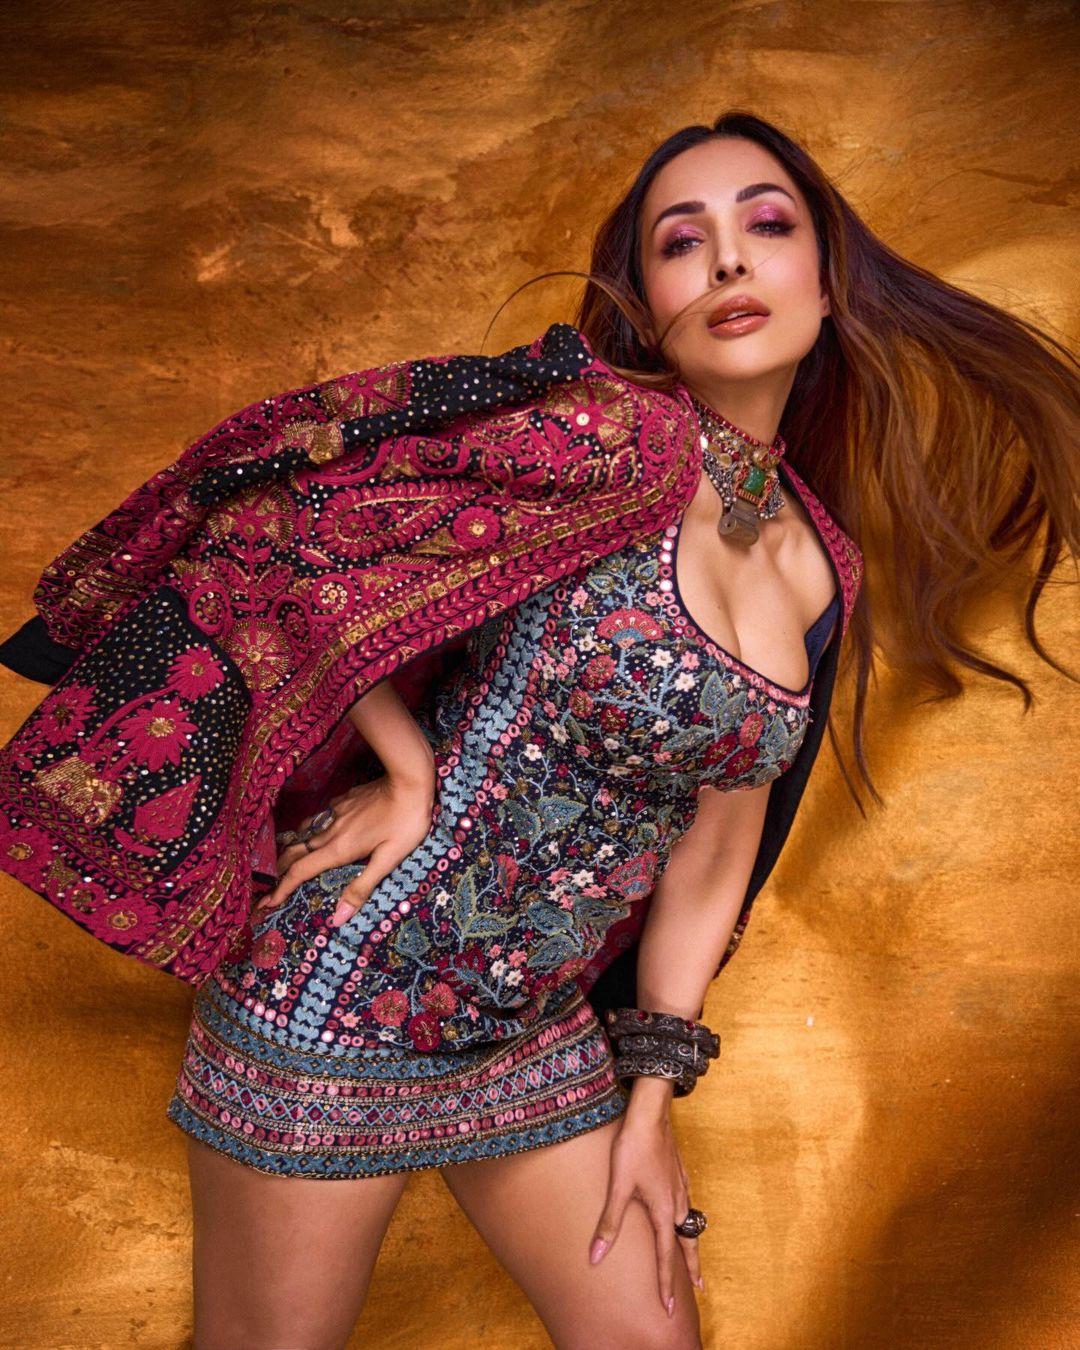 This disciplined approach proves crucial in looking as good as Malaika Arora